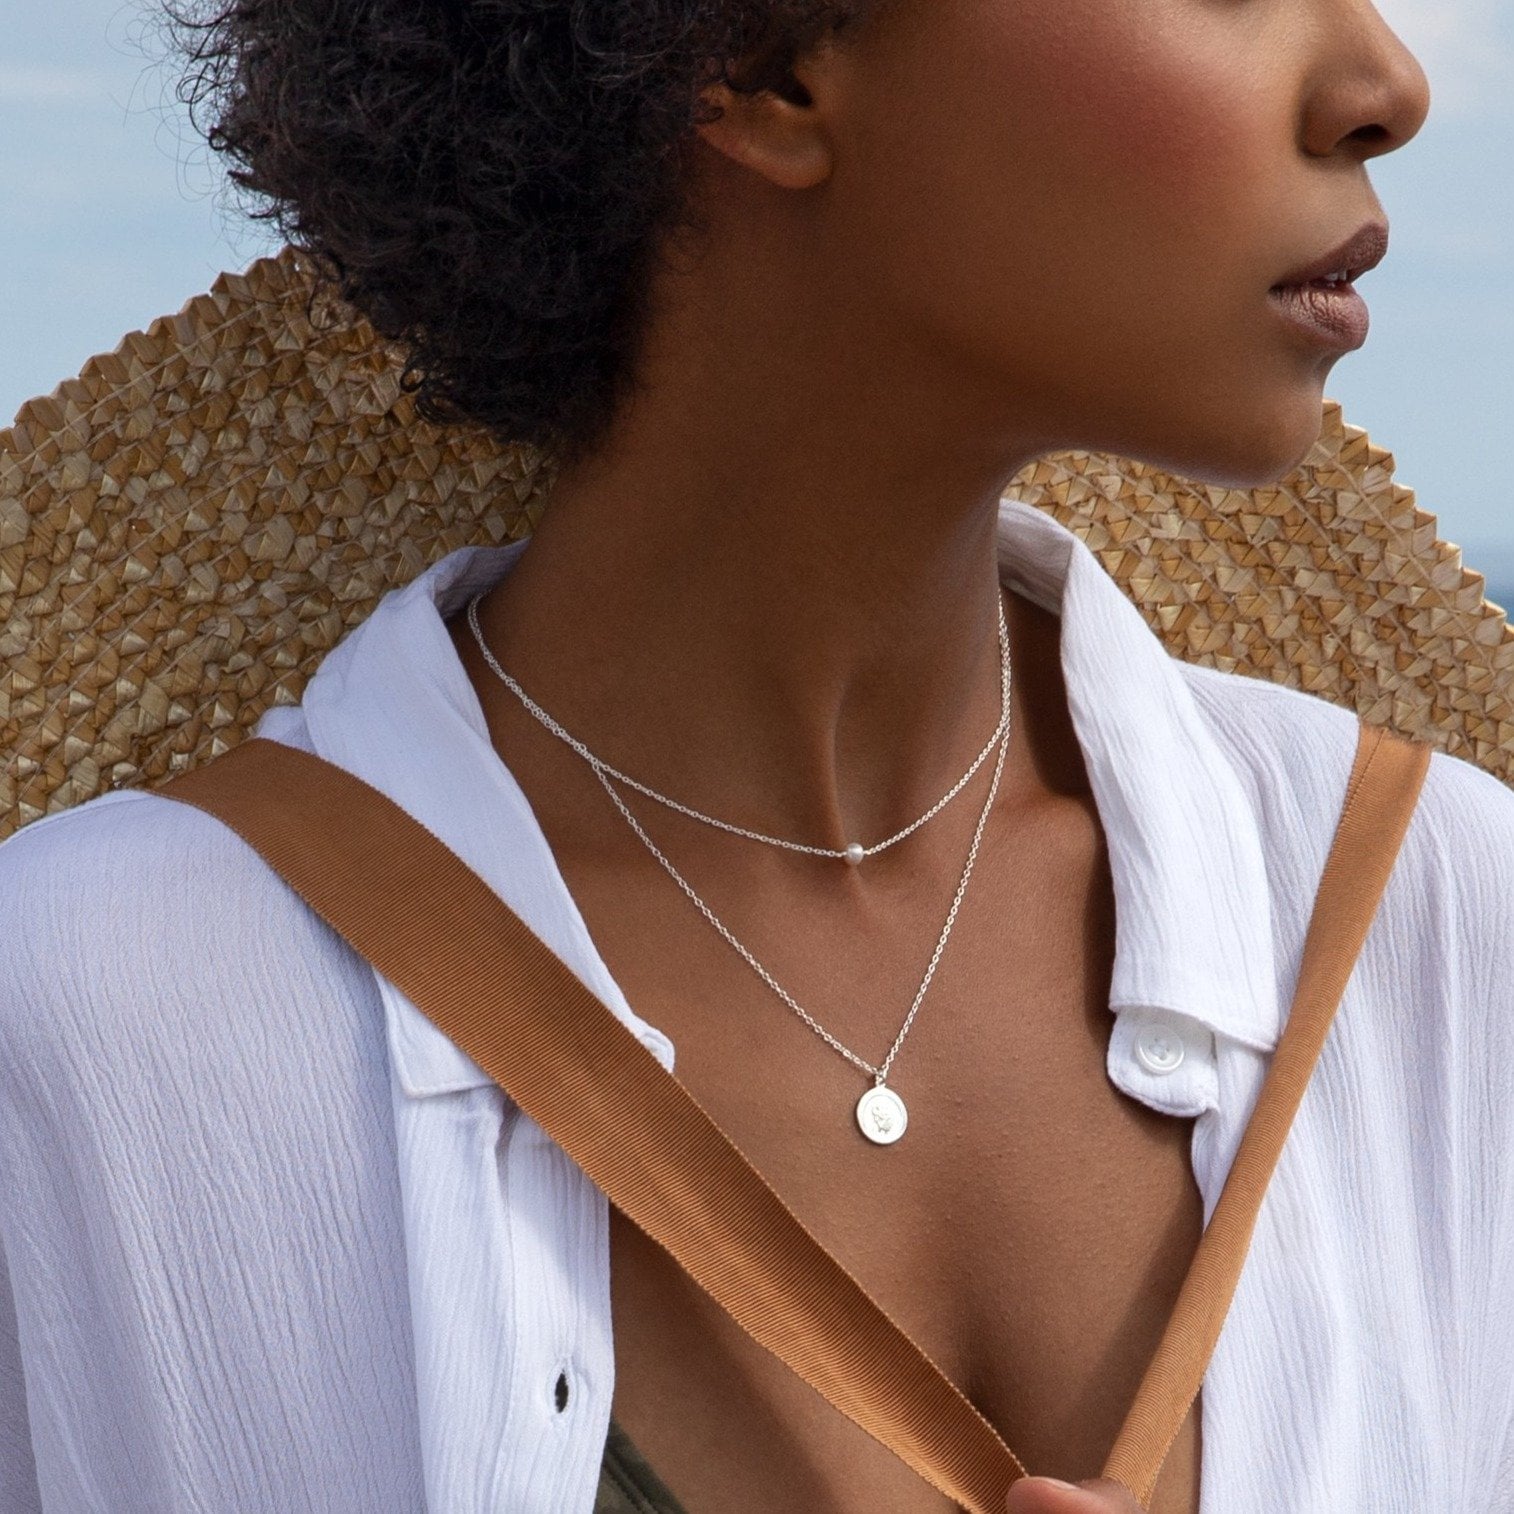 Modern Pearl Necklaces & Earrings for Fashion Forward People | Pearls.co.uk